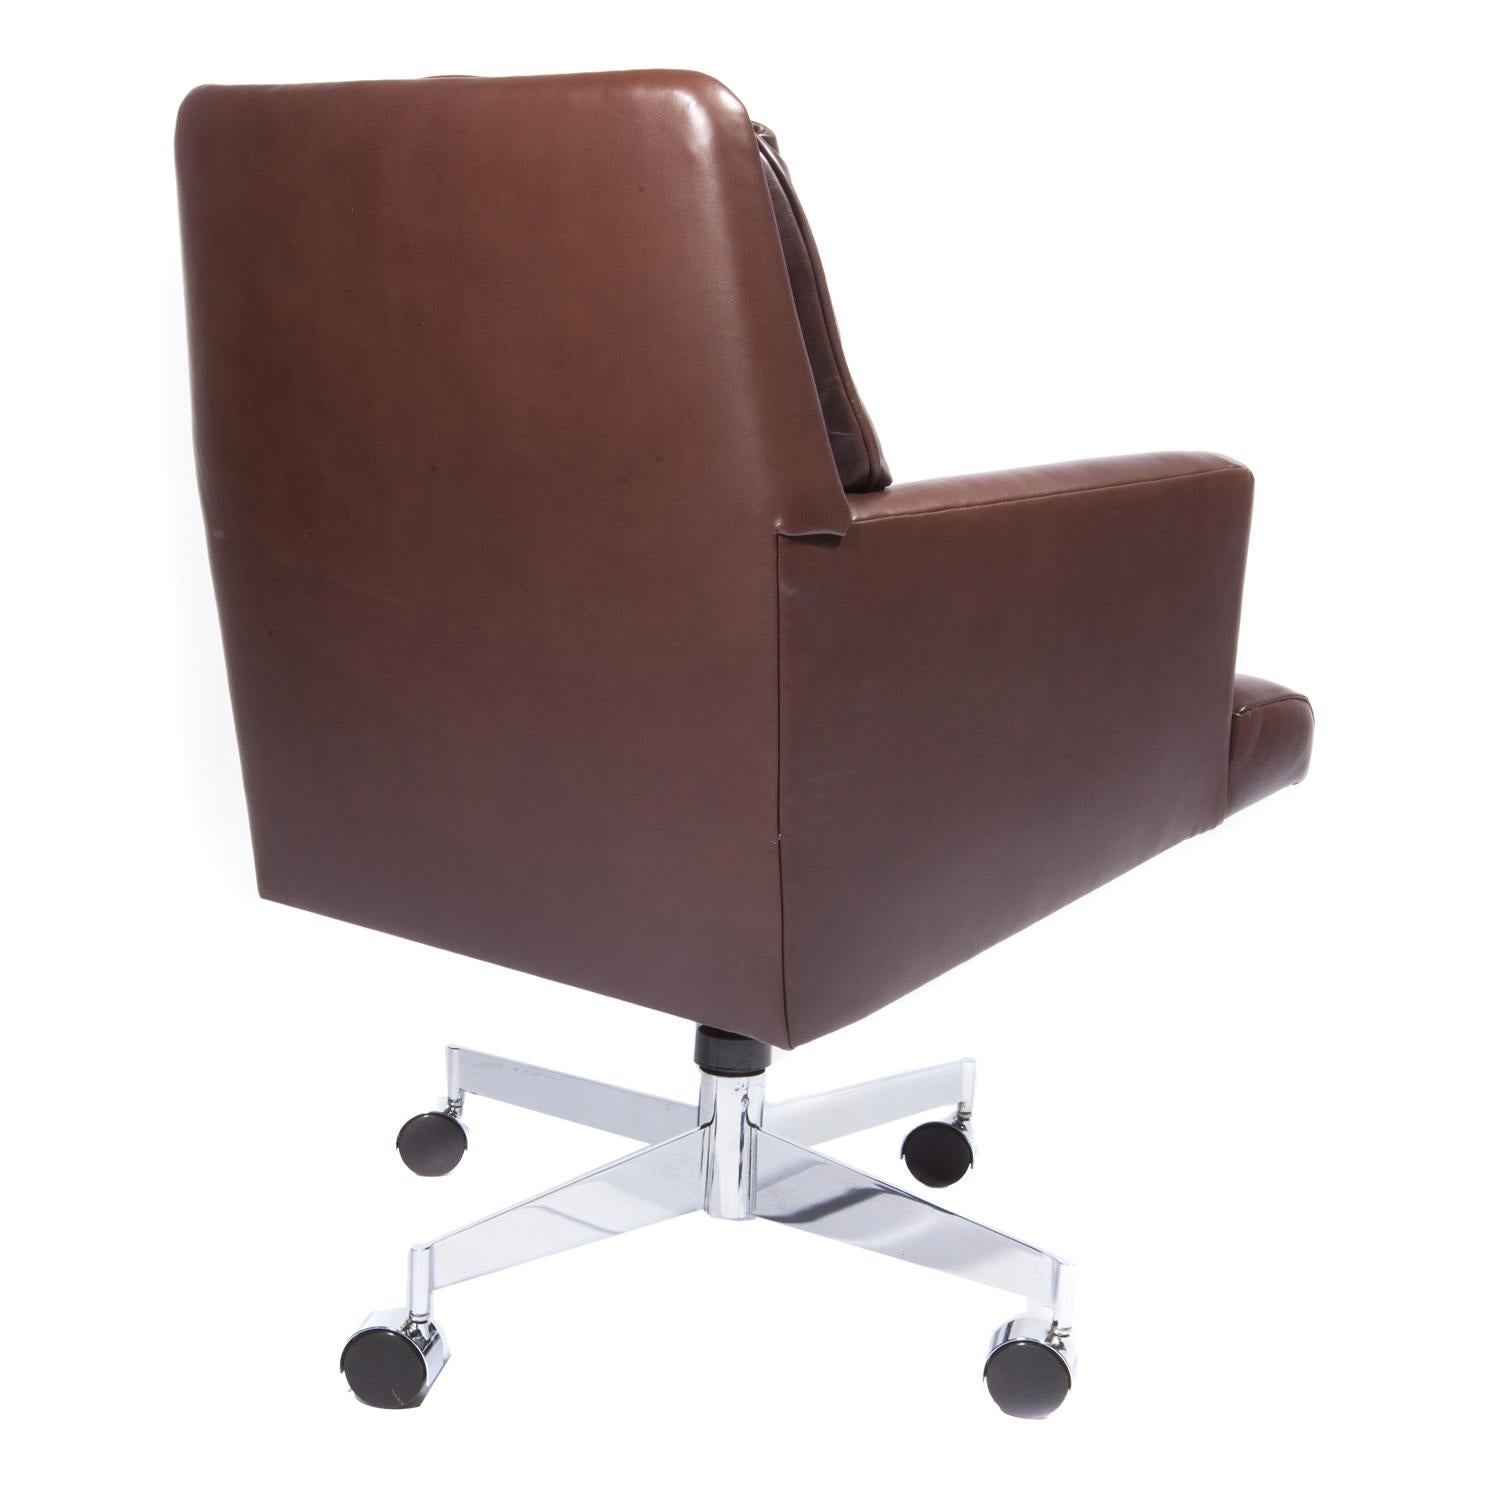 American Edward Wormley Office Chair in Leather with Chrome Base, 1960s